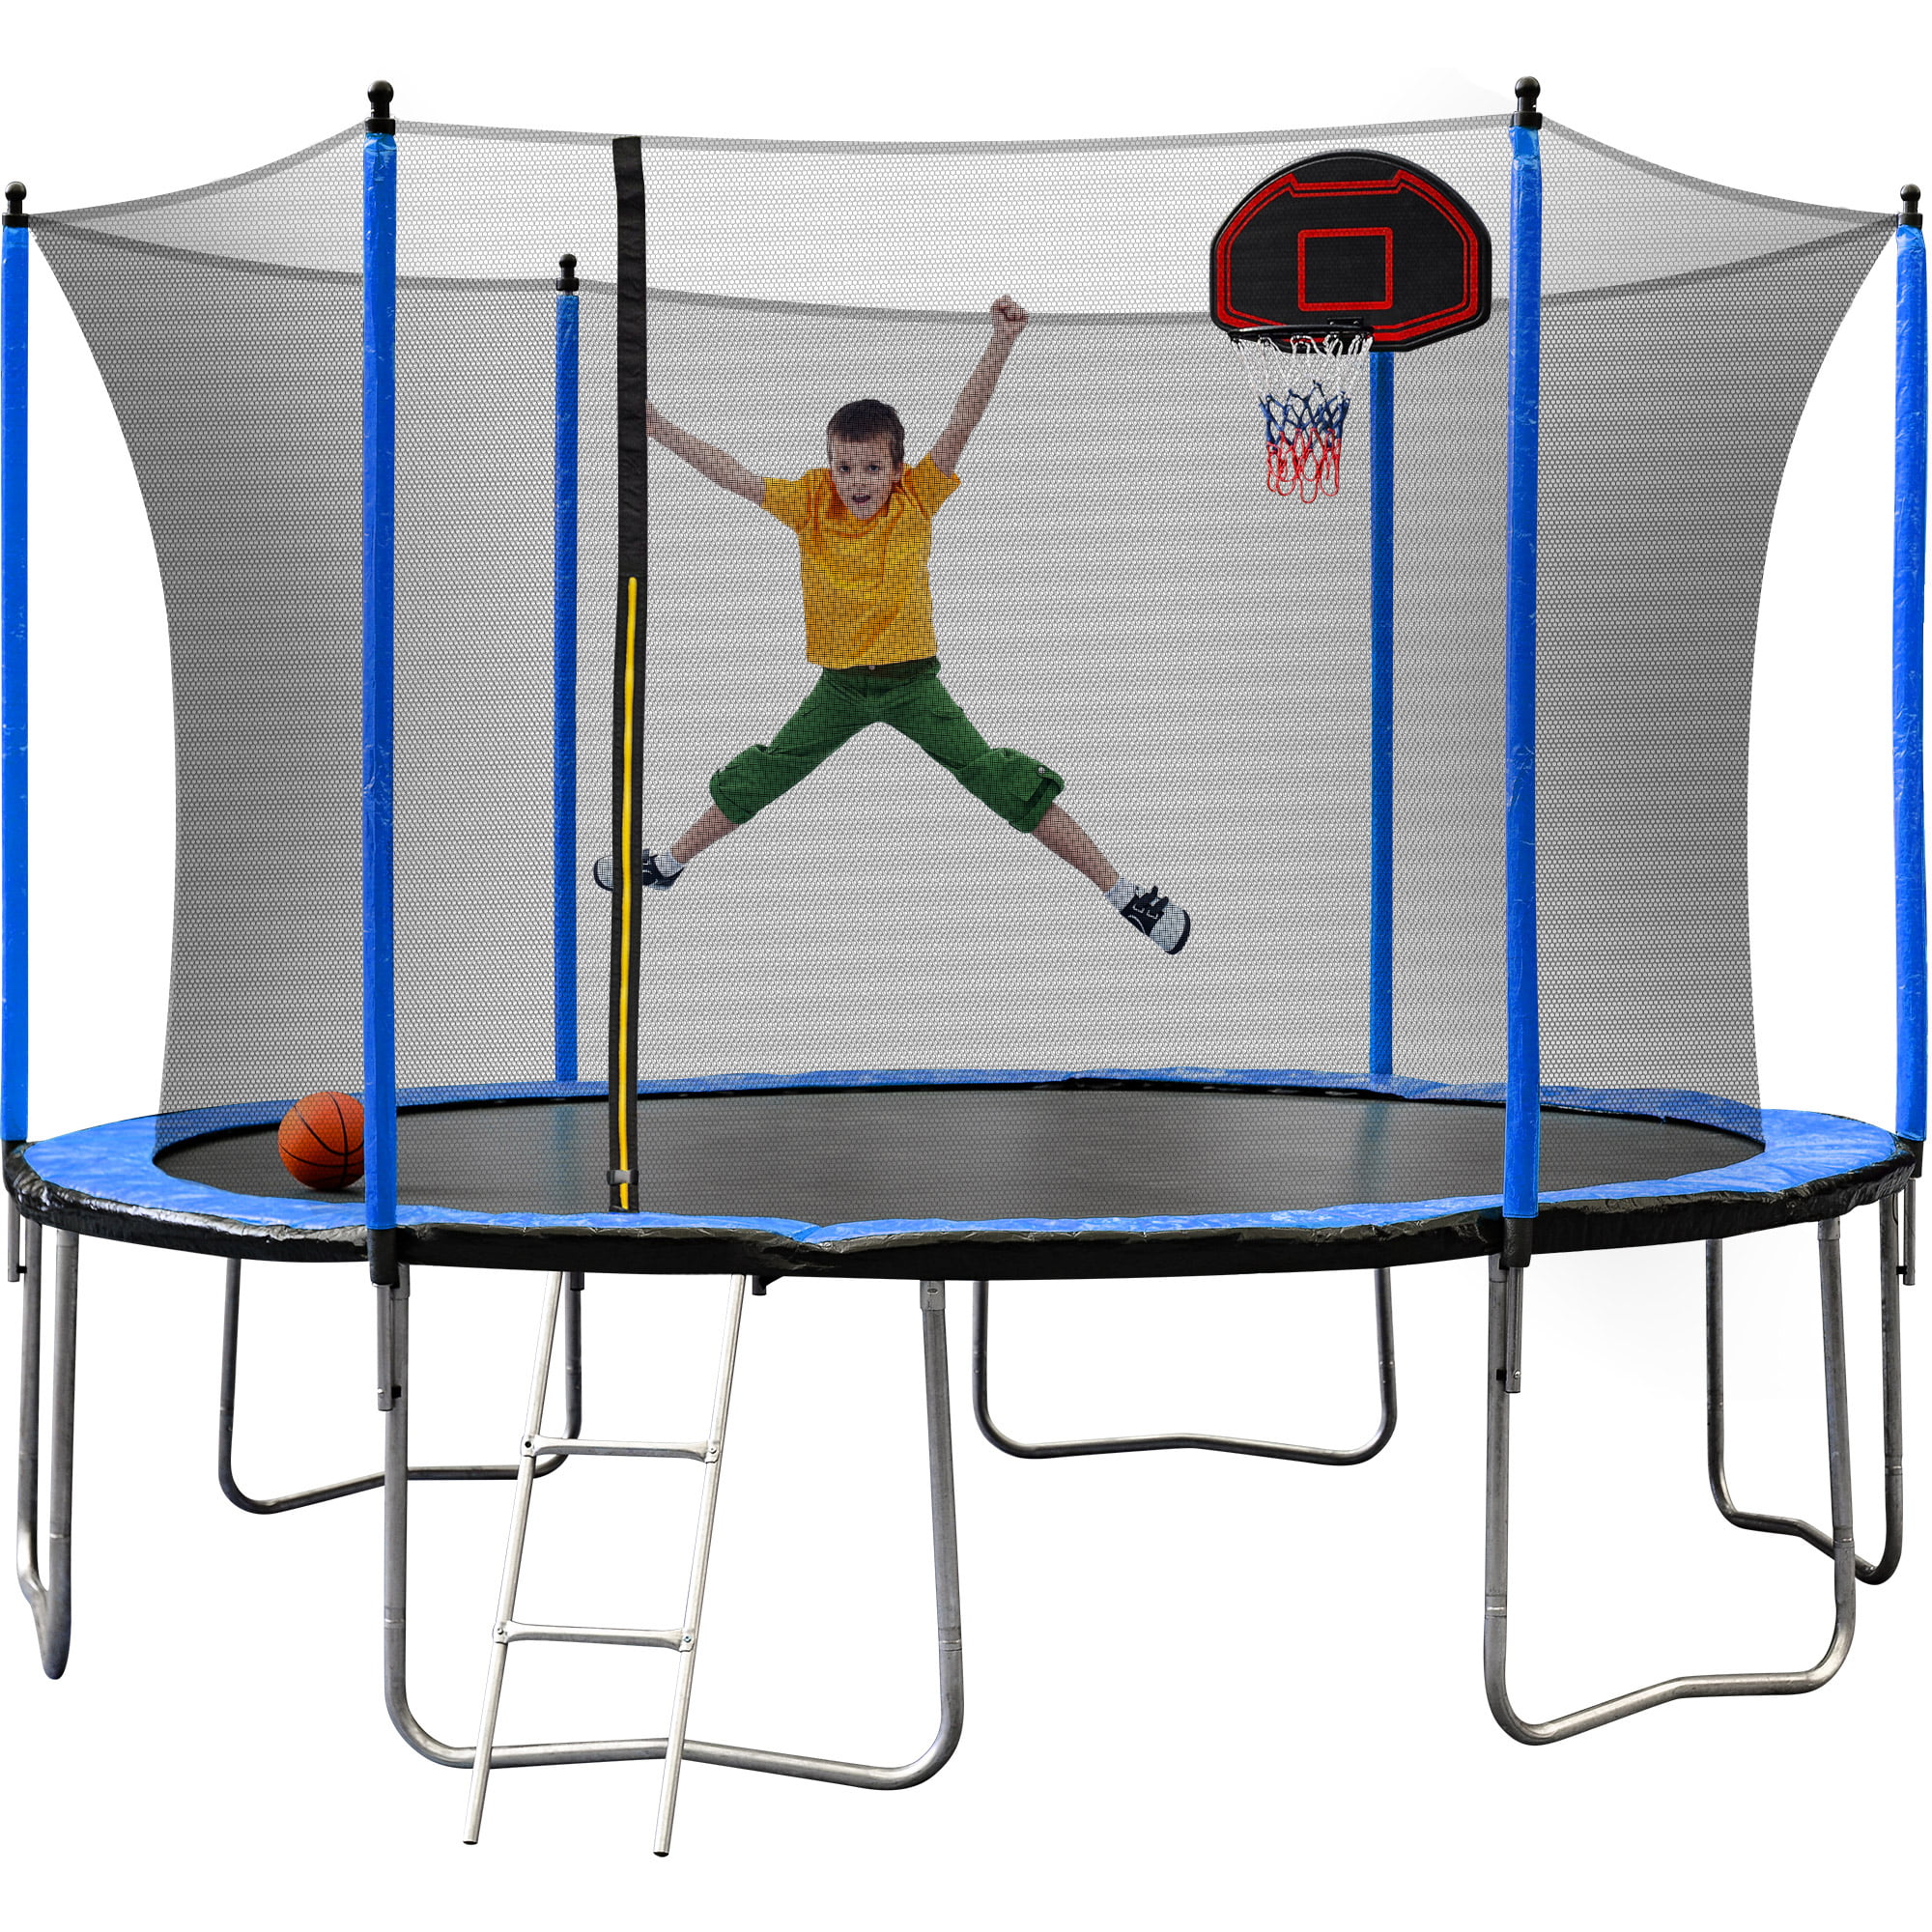 EUROCO 14FT Trampoline for Adults with Enclosure, Outdoor Trampoline ...